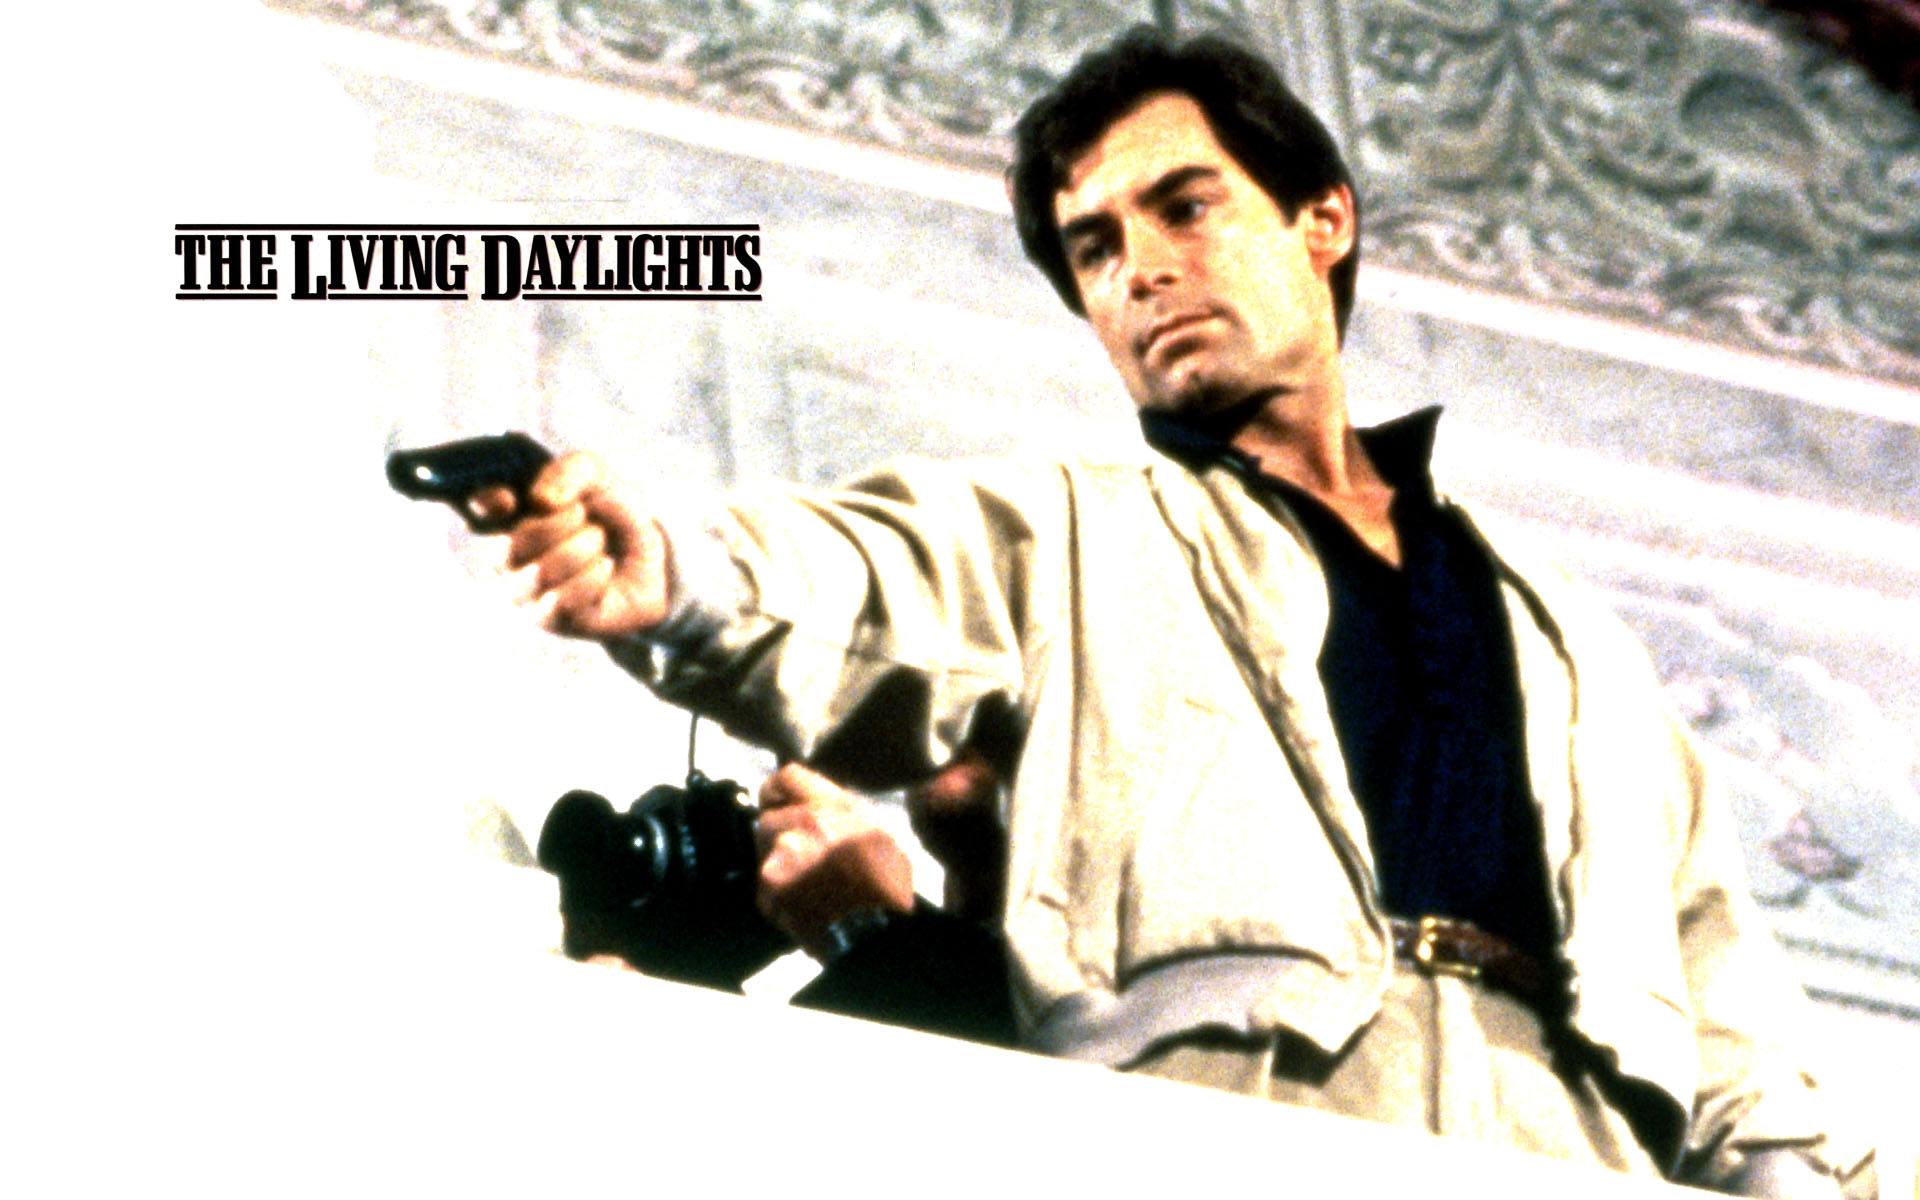 James Bond movie, The Living Daylights, wallpapers, HQ pictures, 1920x1200 HD Desktop